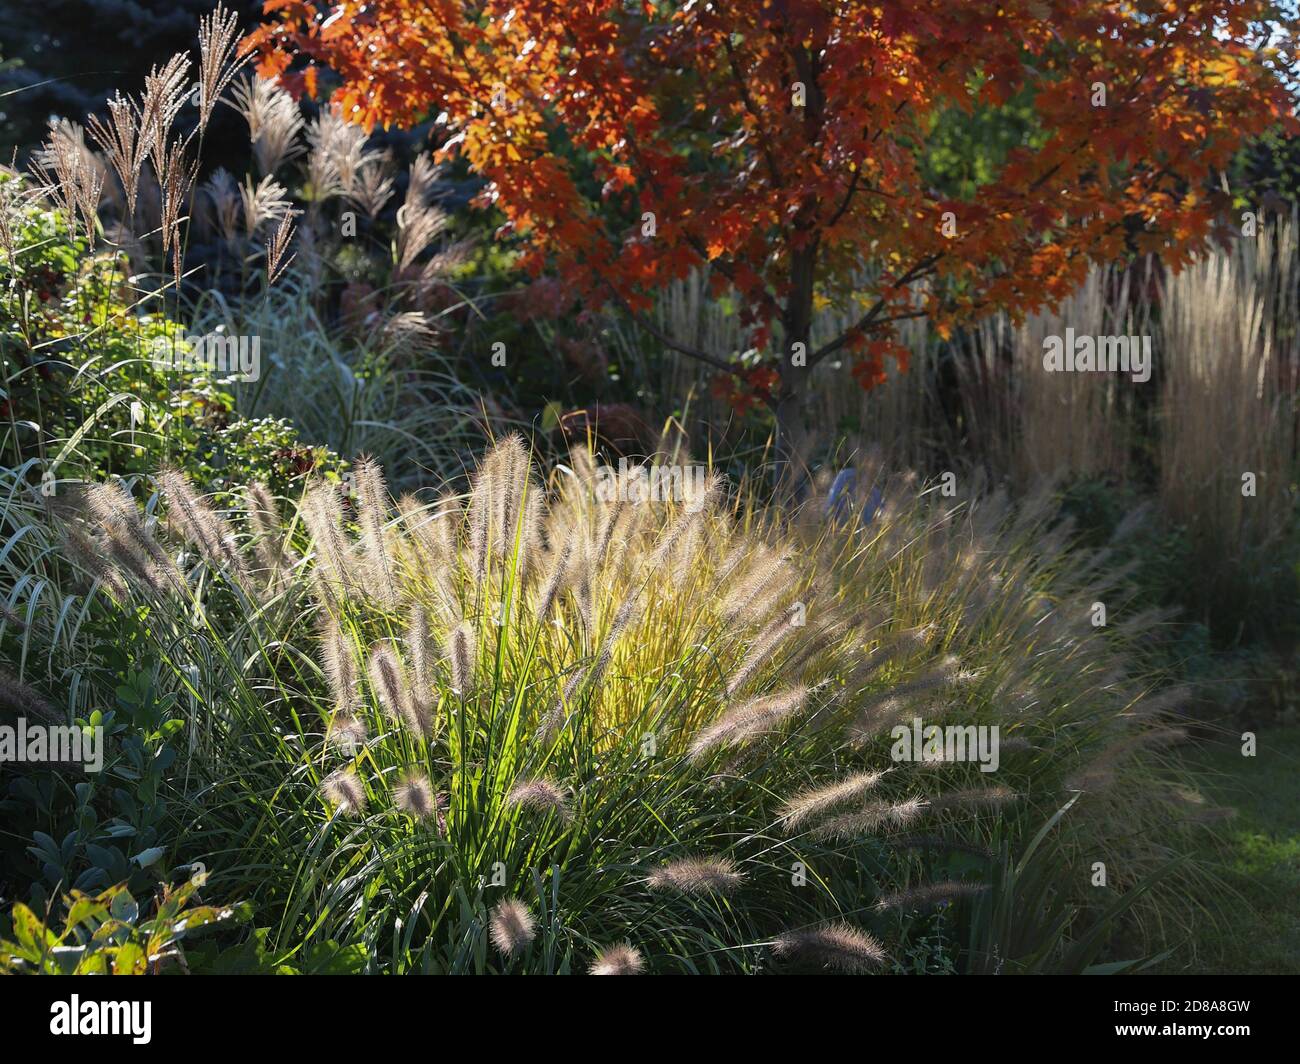 Fountain Grass, Pennisetum alopecuroides, National Arboretum, and reed grass highlighted by the late afternoon sun along with Autumn Blaze Maple. Stock Photo